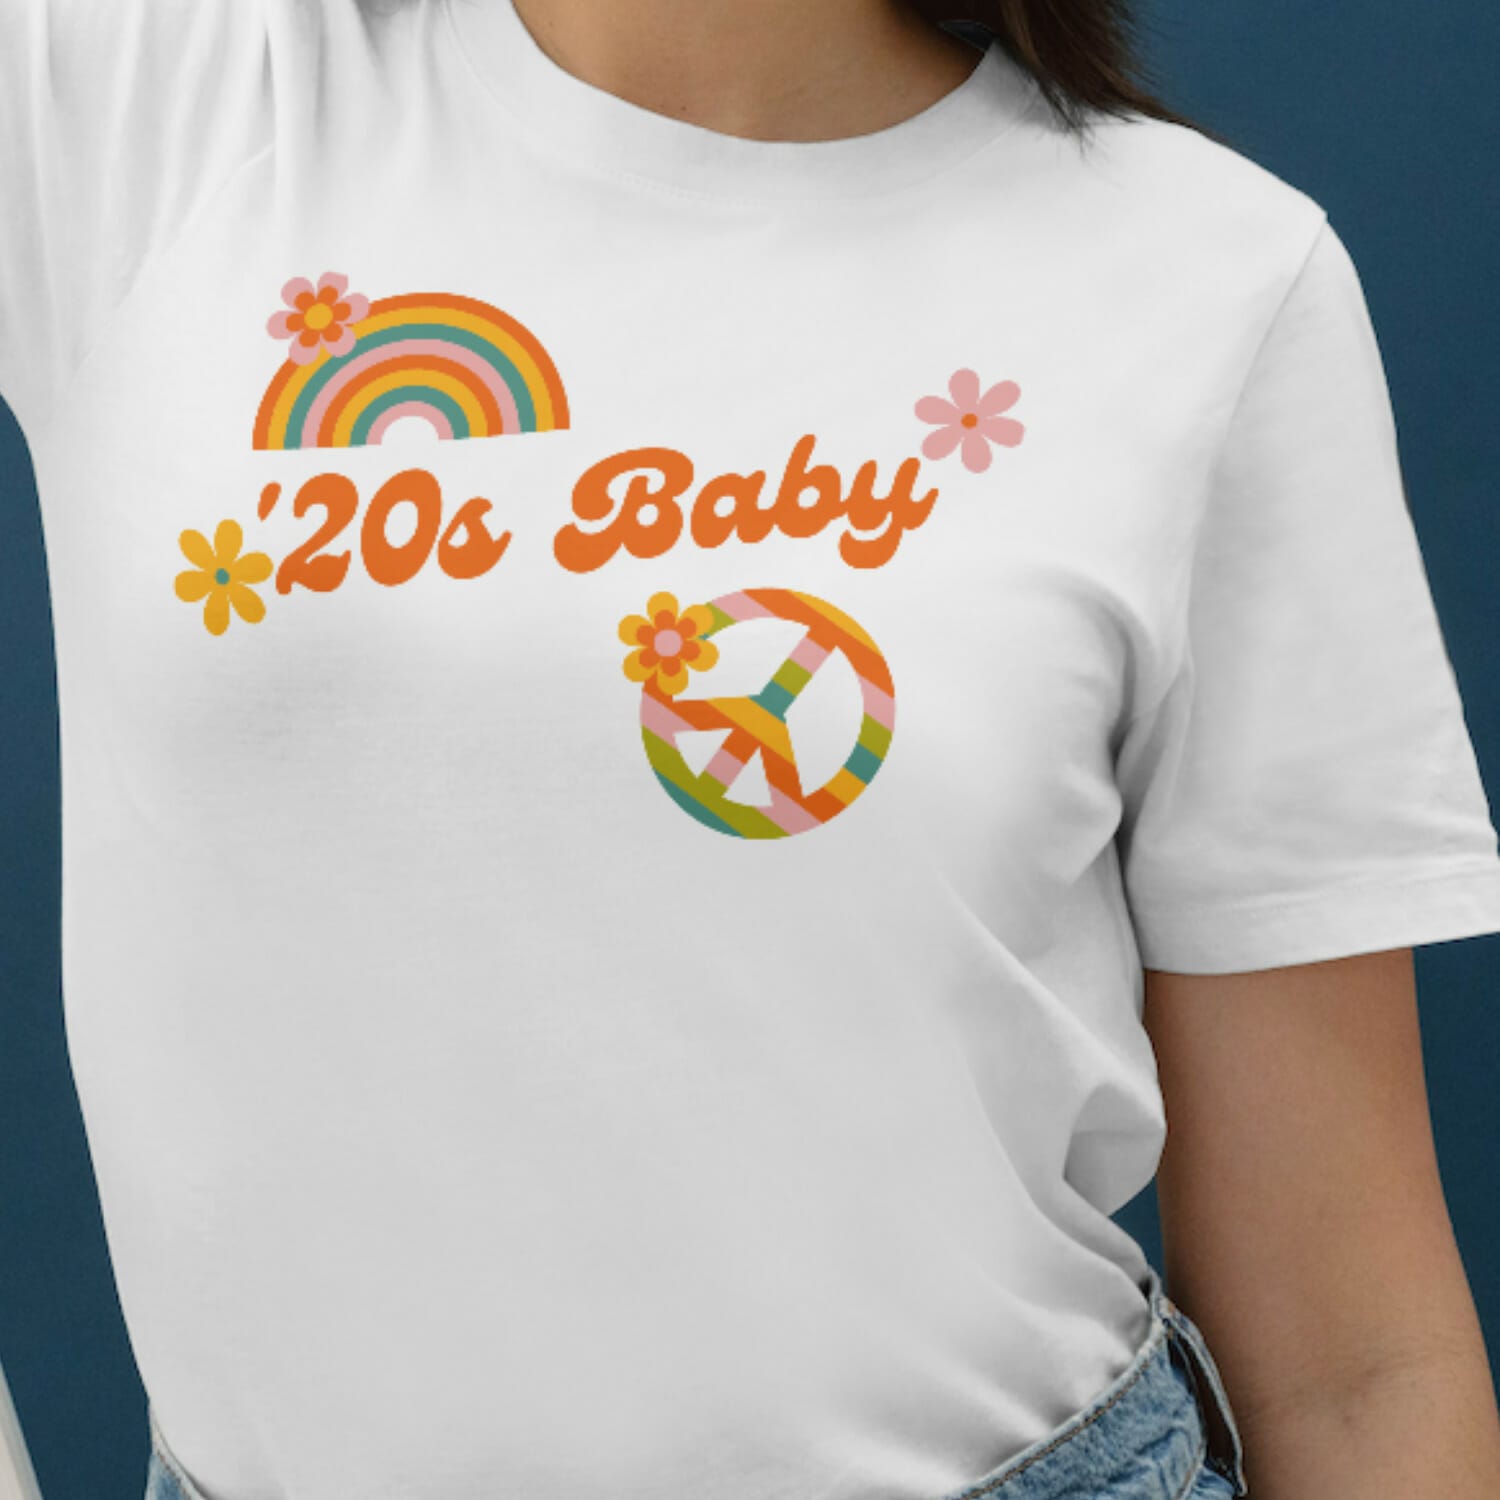 Groovy style 20s baby T shirt design